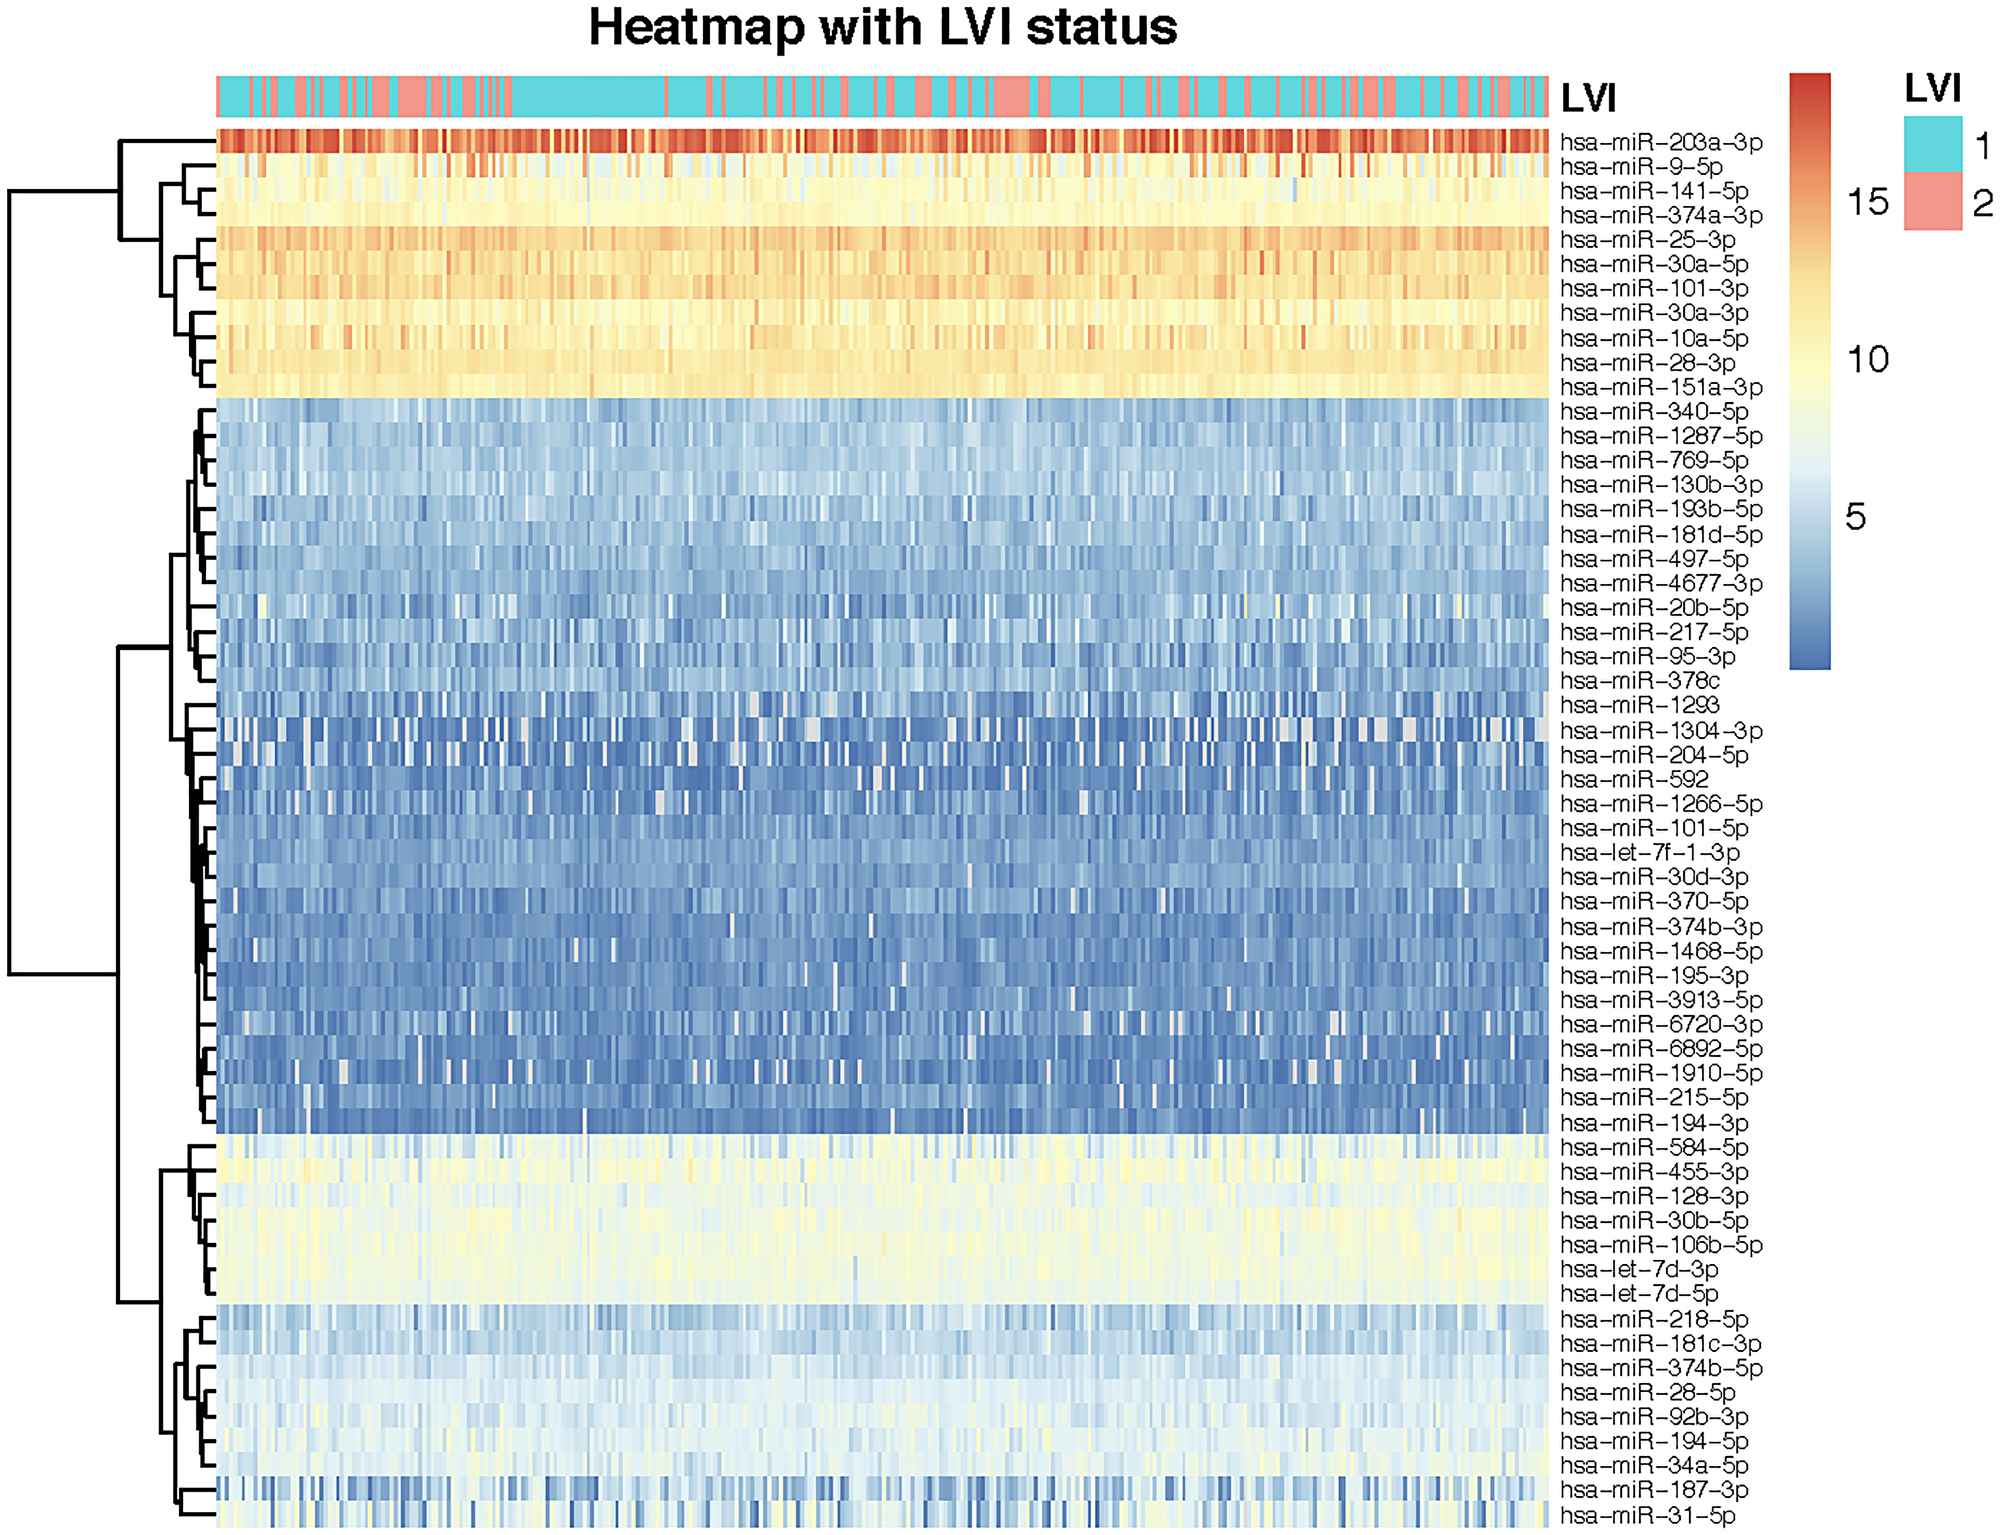 Heatmap of miRNA expressions for 324 patients showing unsupervised clustering of miRNAs.